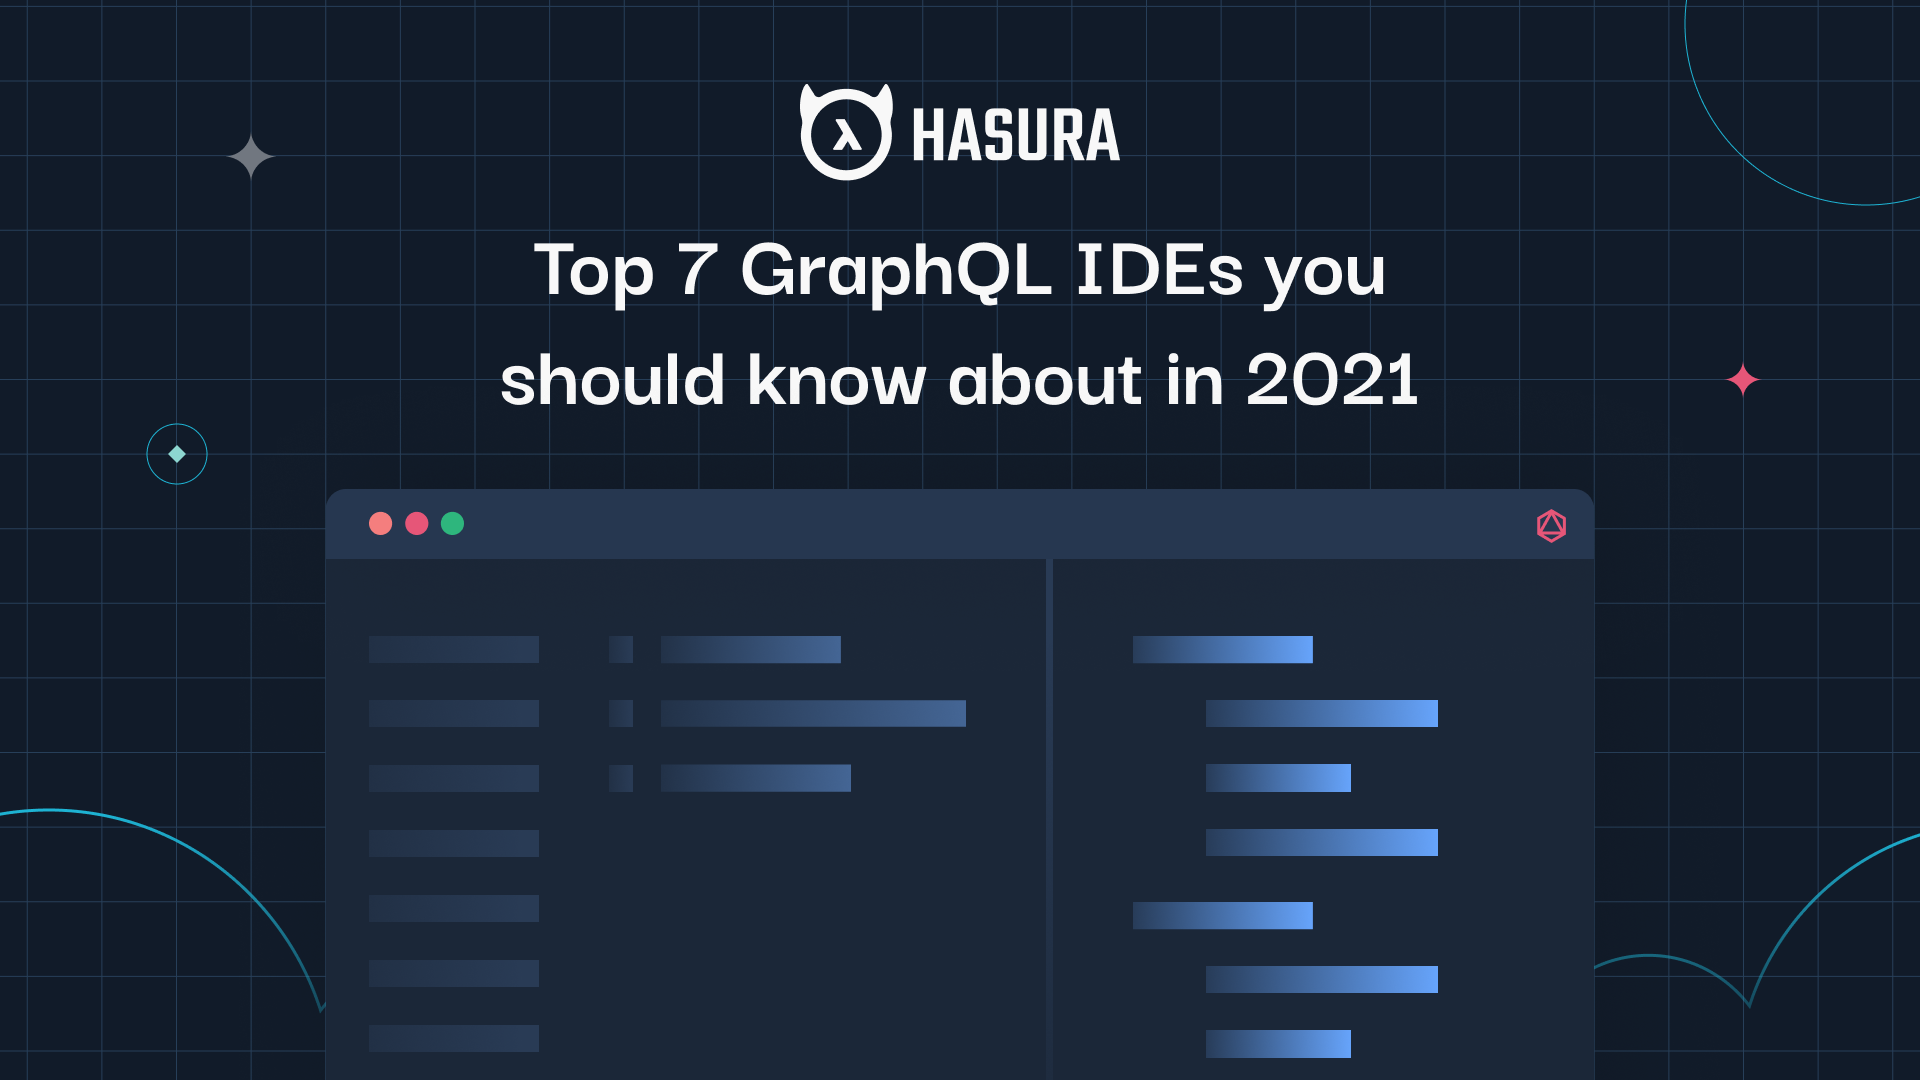 Top 7 GraphQL IDEs you should know about in 2021